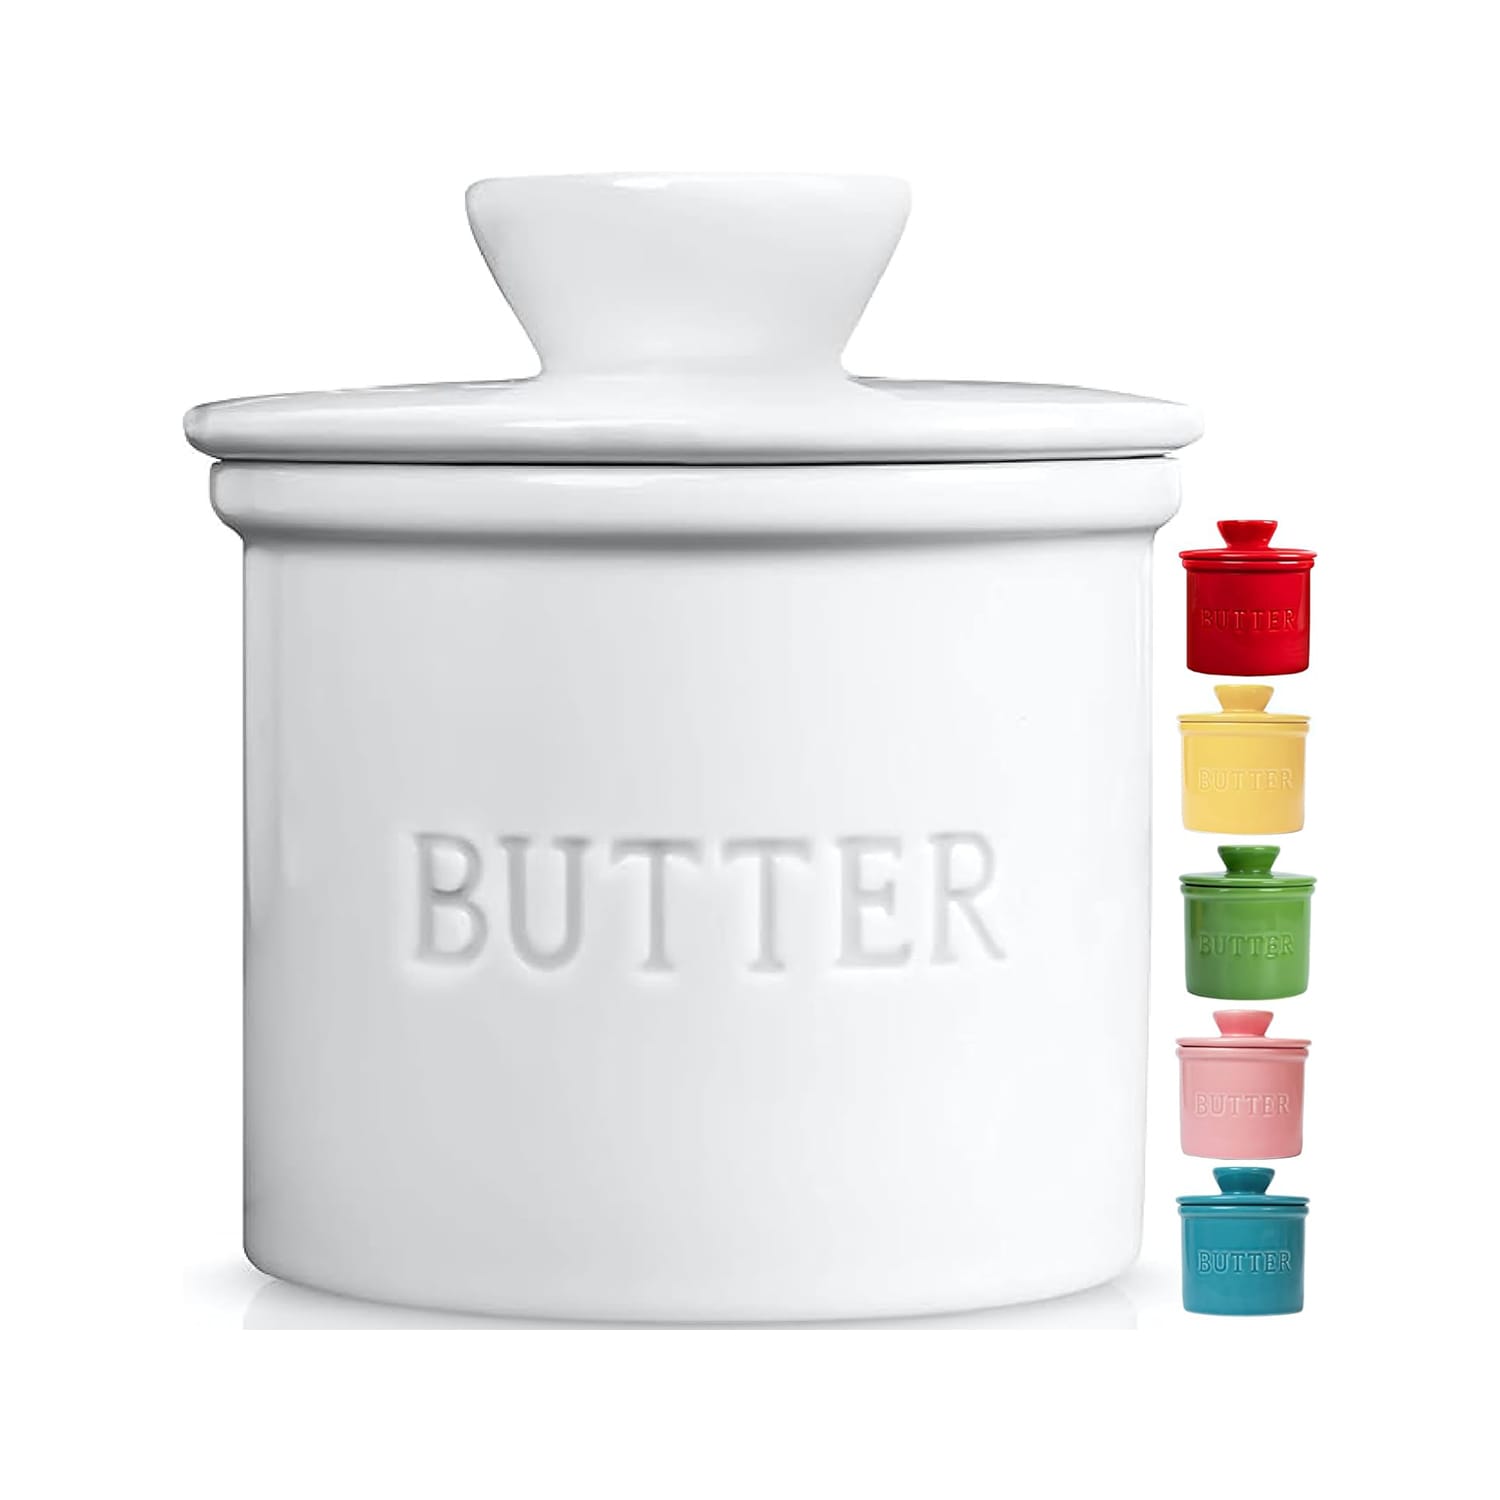 4 Reasons You Should Have a Butter Warmer